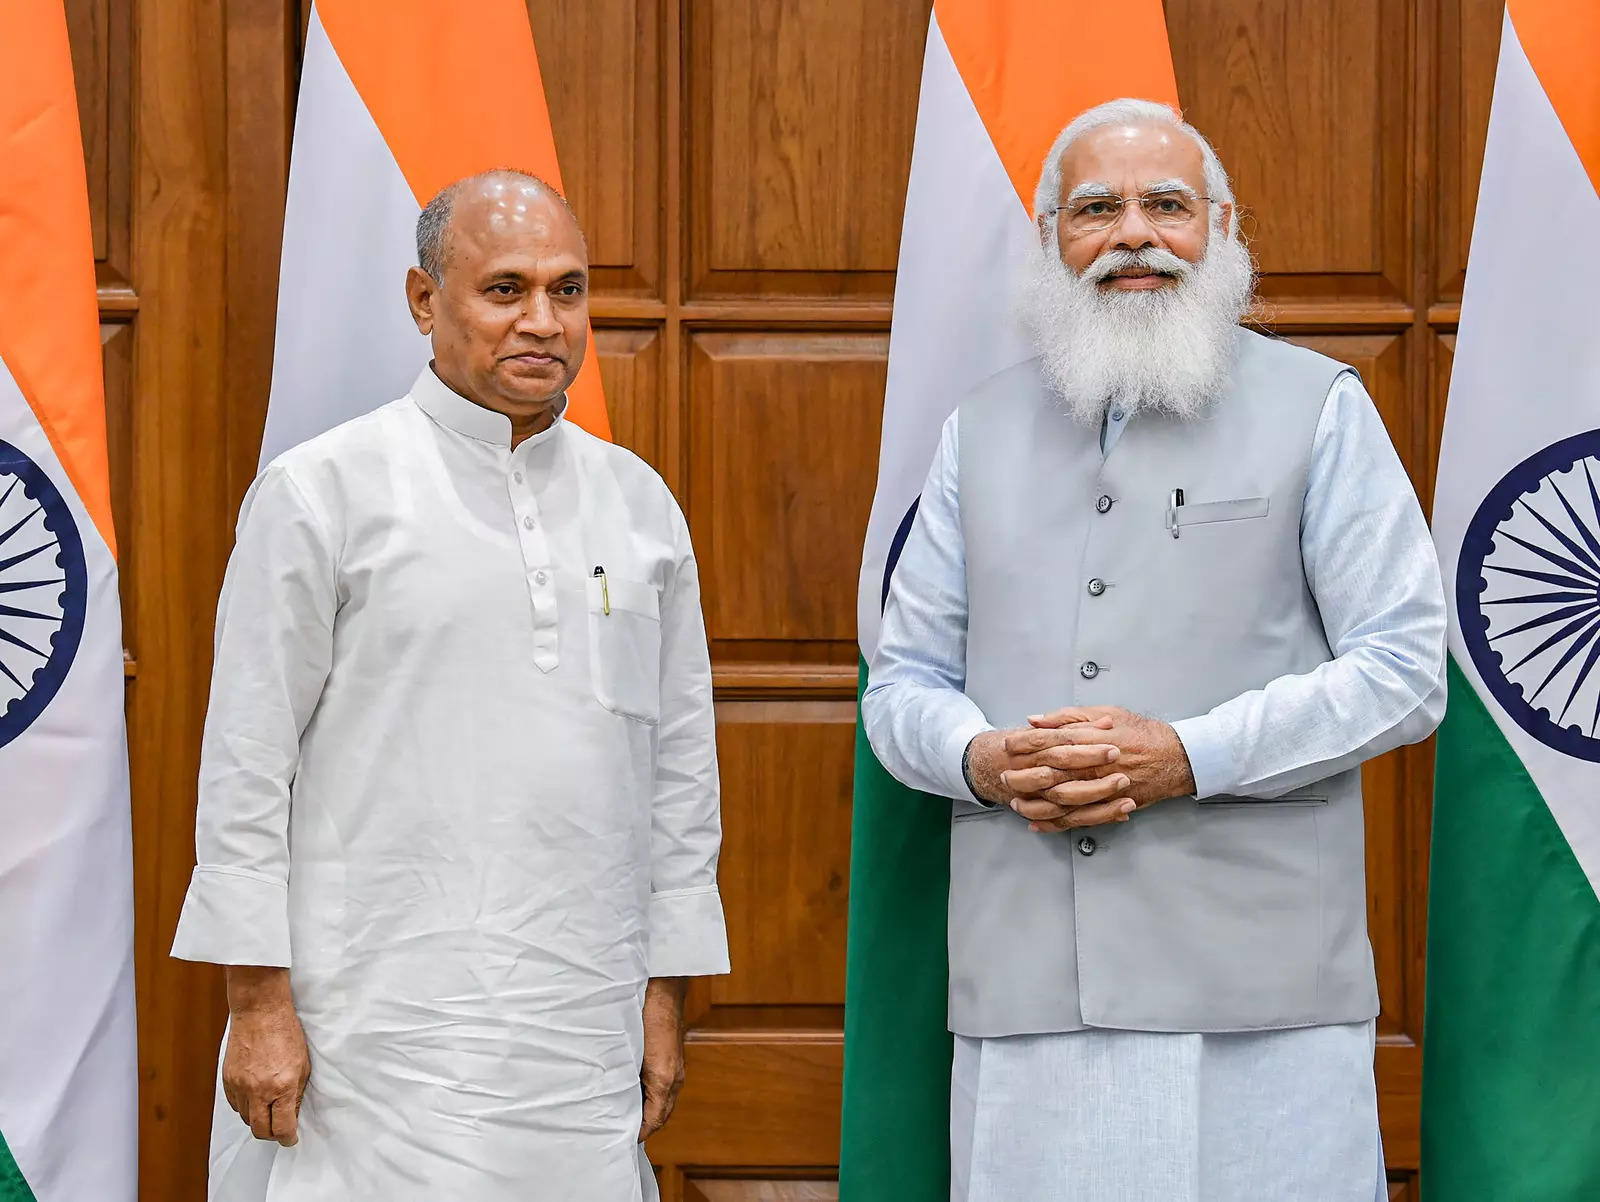 Ram Chandra Prasad Singh assumes charge as Union steel minister | India News - Times of India